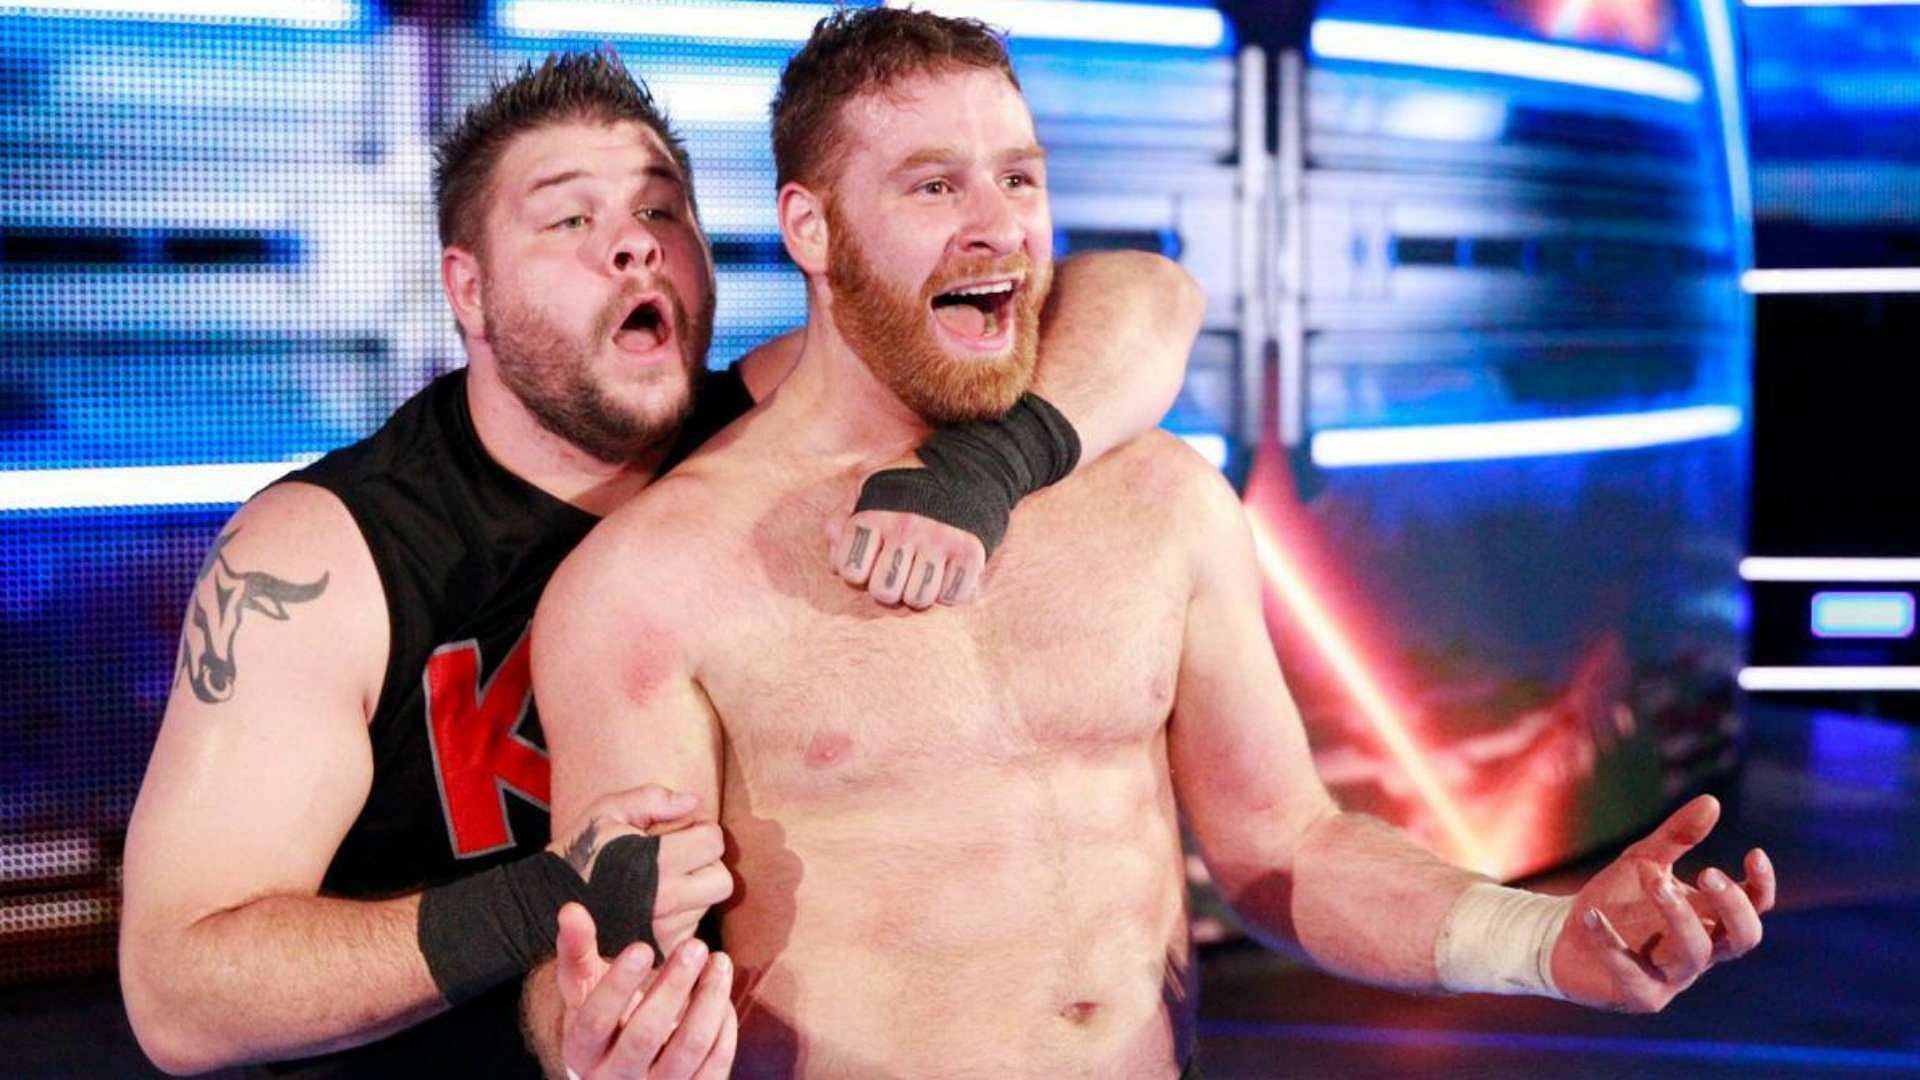 Kevin Owens and Sami Zayn have been friends for more than a decade.